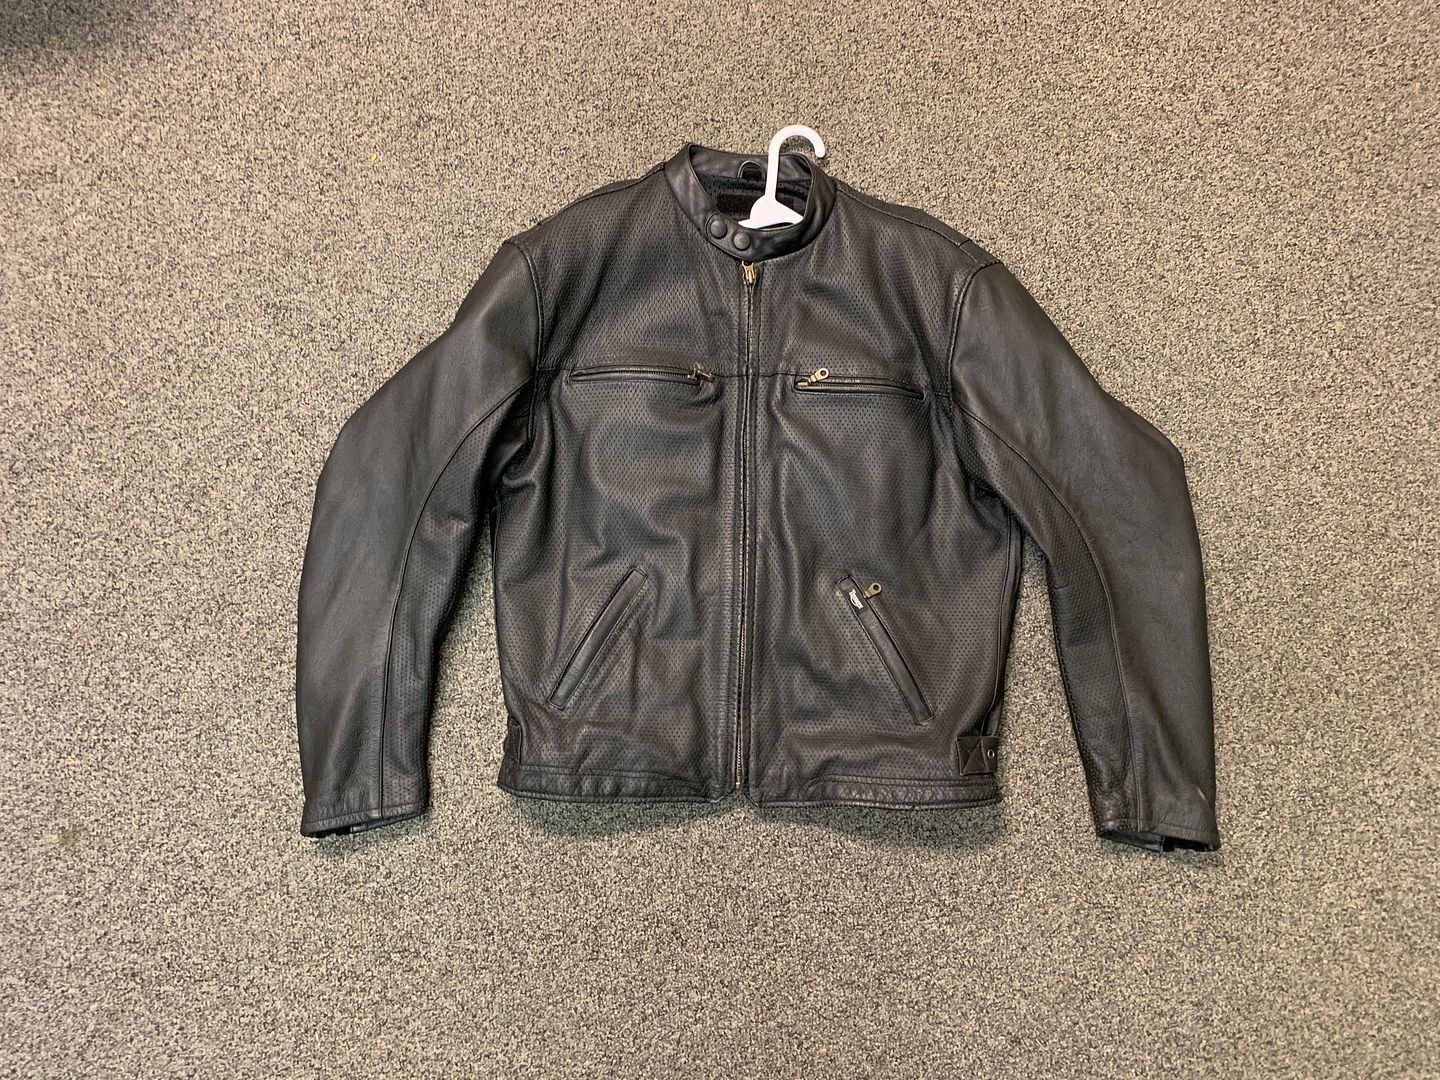 Sold - Triumph Perforated Leather Jacket $90 Charlotte | Adventure Rider